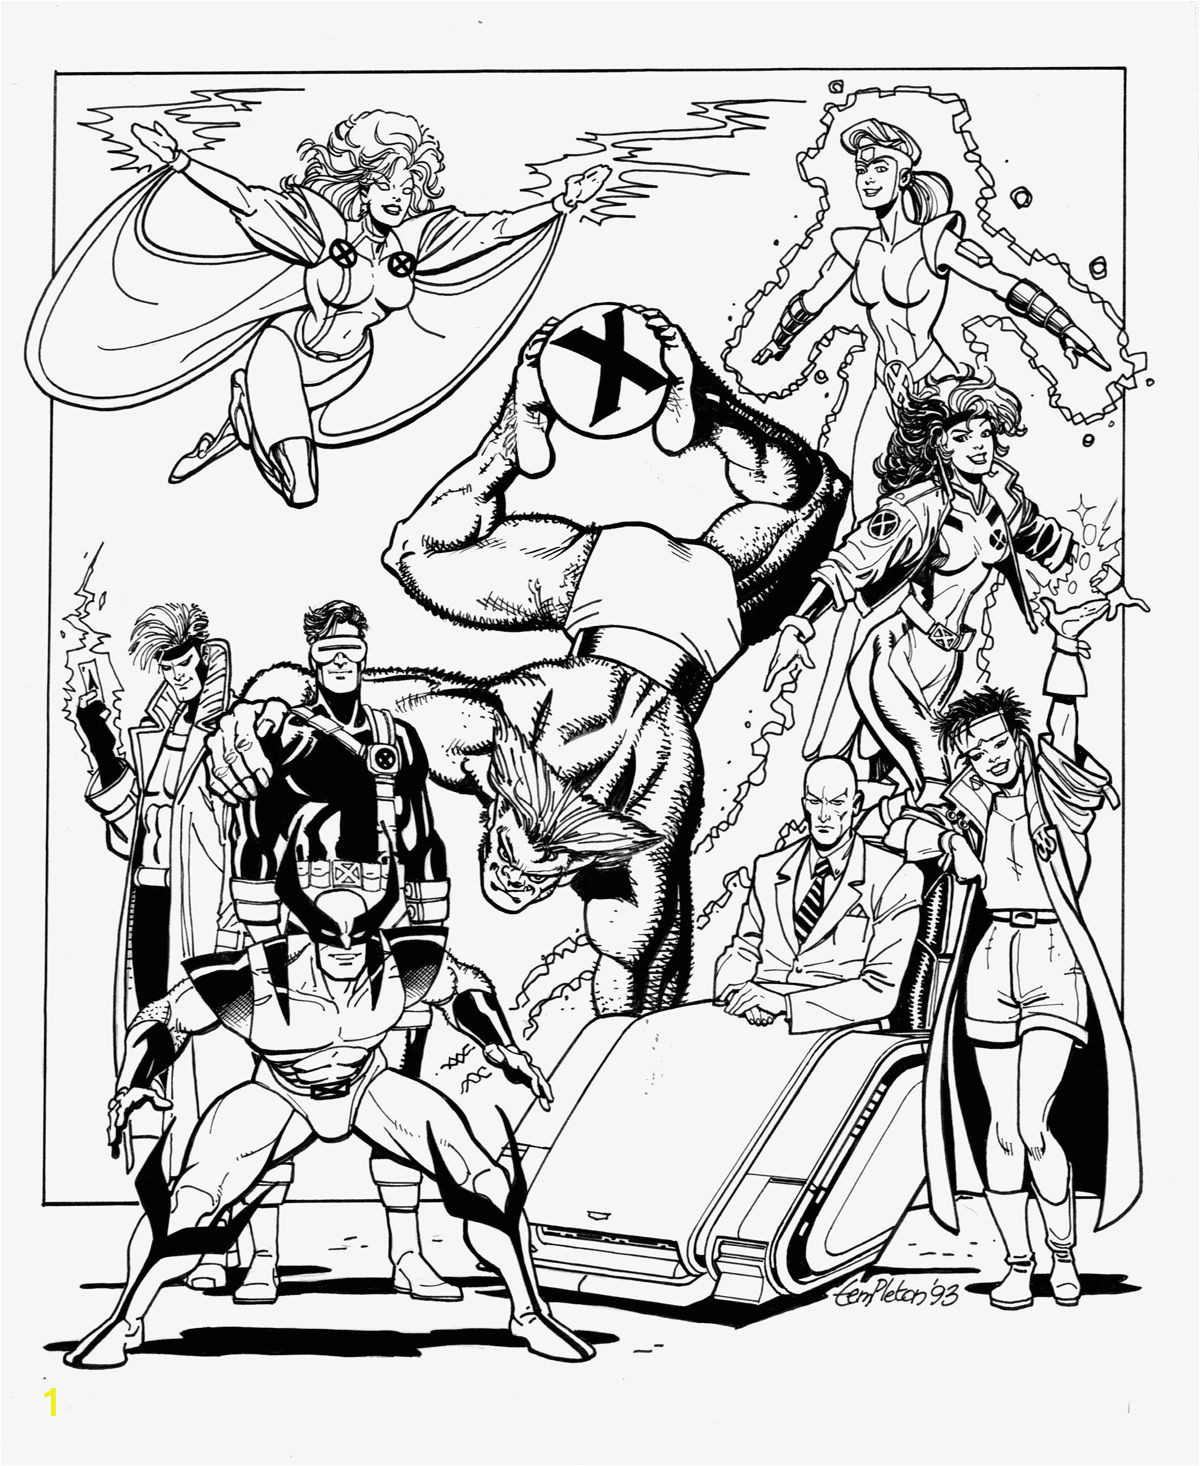 X-men Coloring Pages Of Storm X Men Superheroes Books and Ics Coloring Pages for